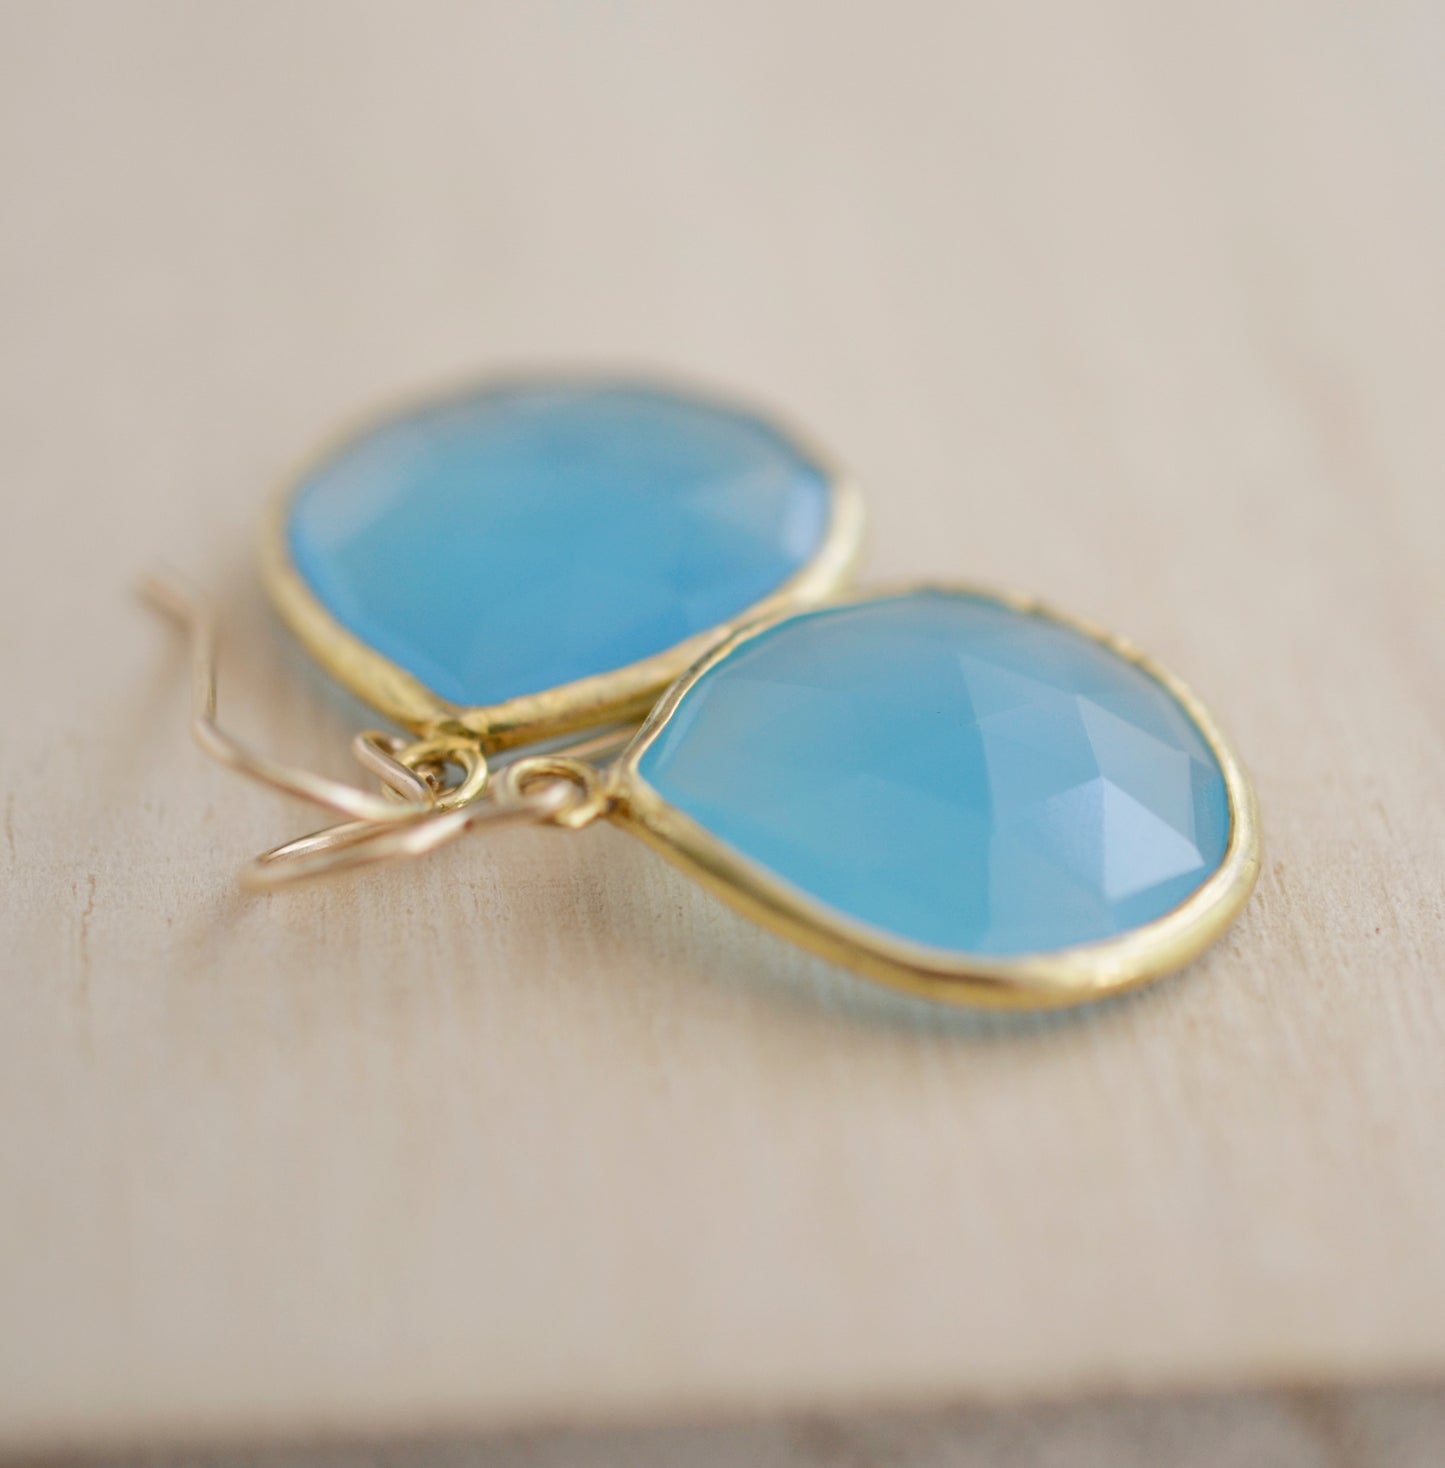 Large blue chalcedony teardrop gemstones bezeled in gold and suspended from earwires. Close up.